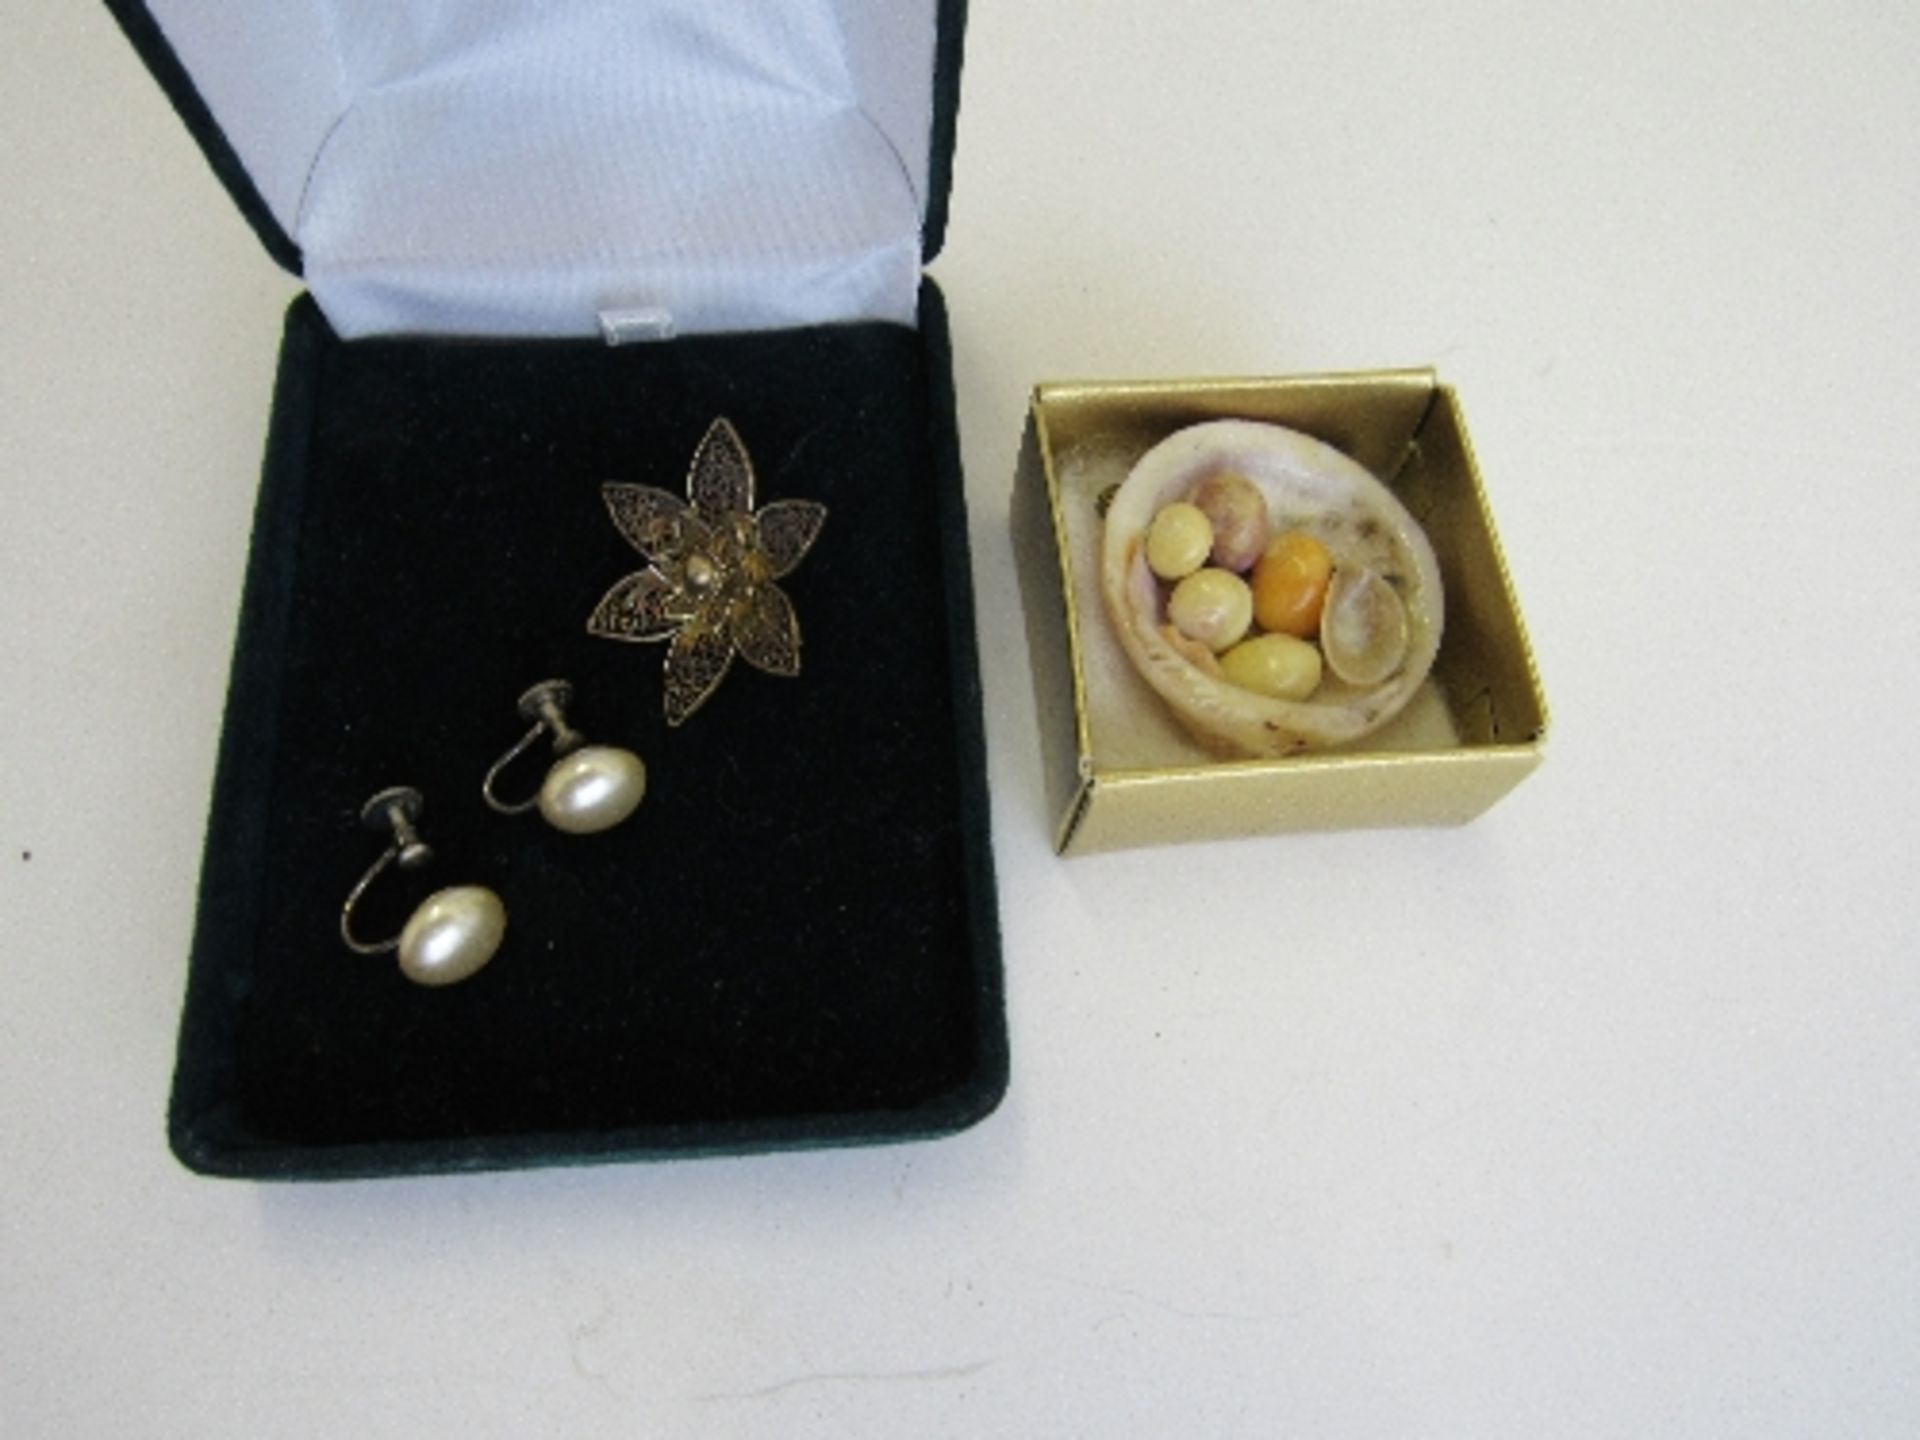 Cockle shell brooch, pair of silver & pearl earrings & a fine filigree brooch of white metal &